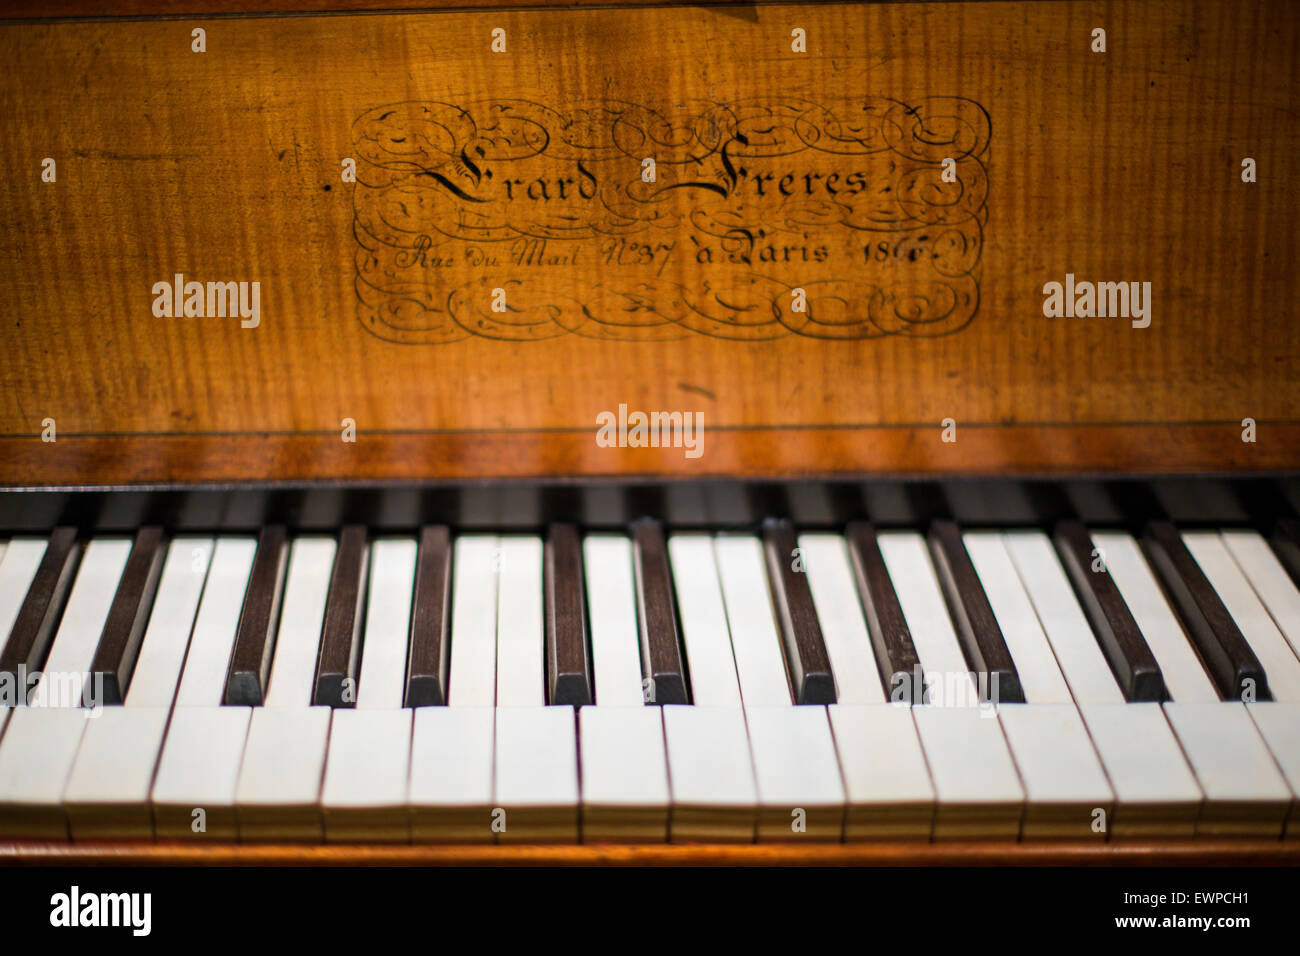 Antique keyboard instrument, Museum of Musical Instruments, Brussels, Belgium Stock Photo